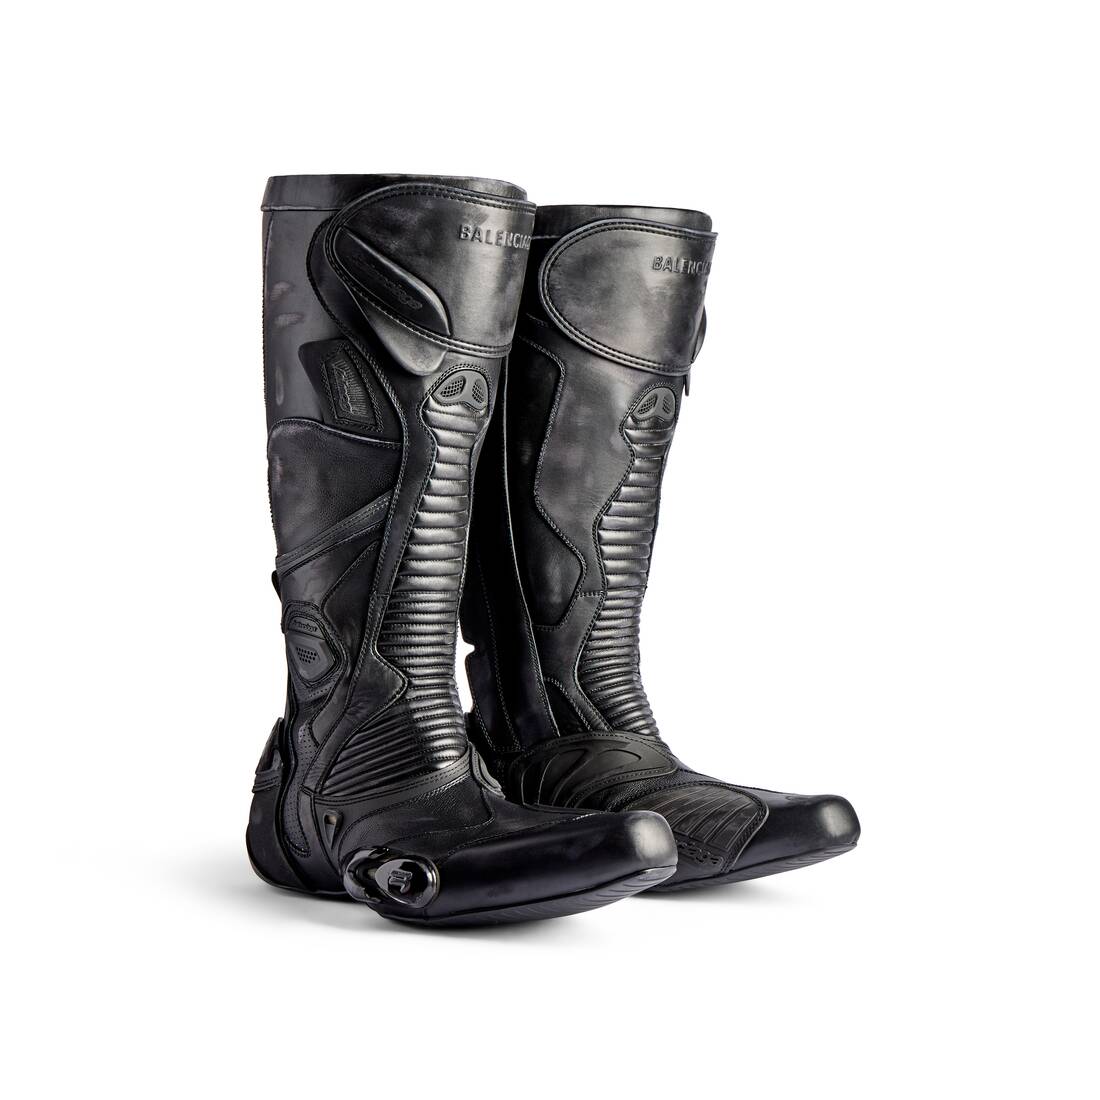 Balenciaga Rolls Out Oversized, Pointy-Toed Biker Boot